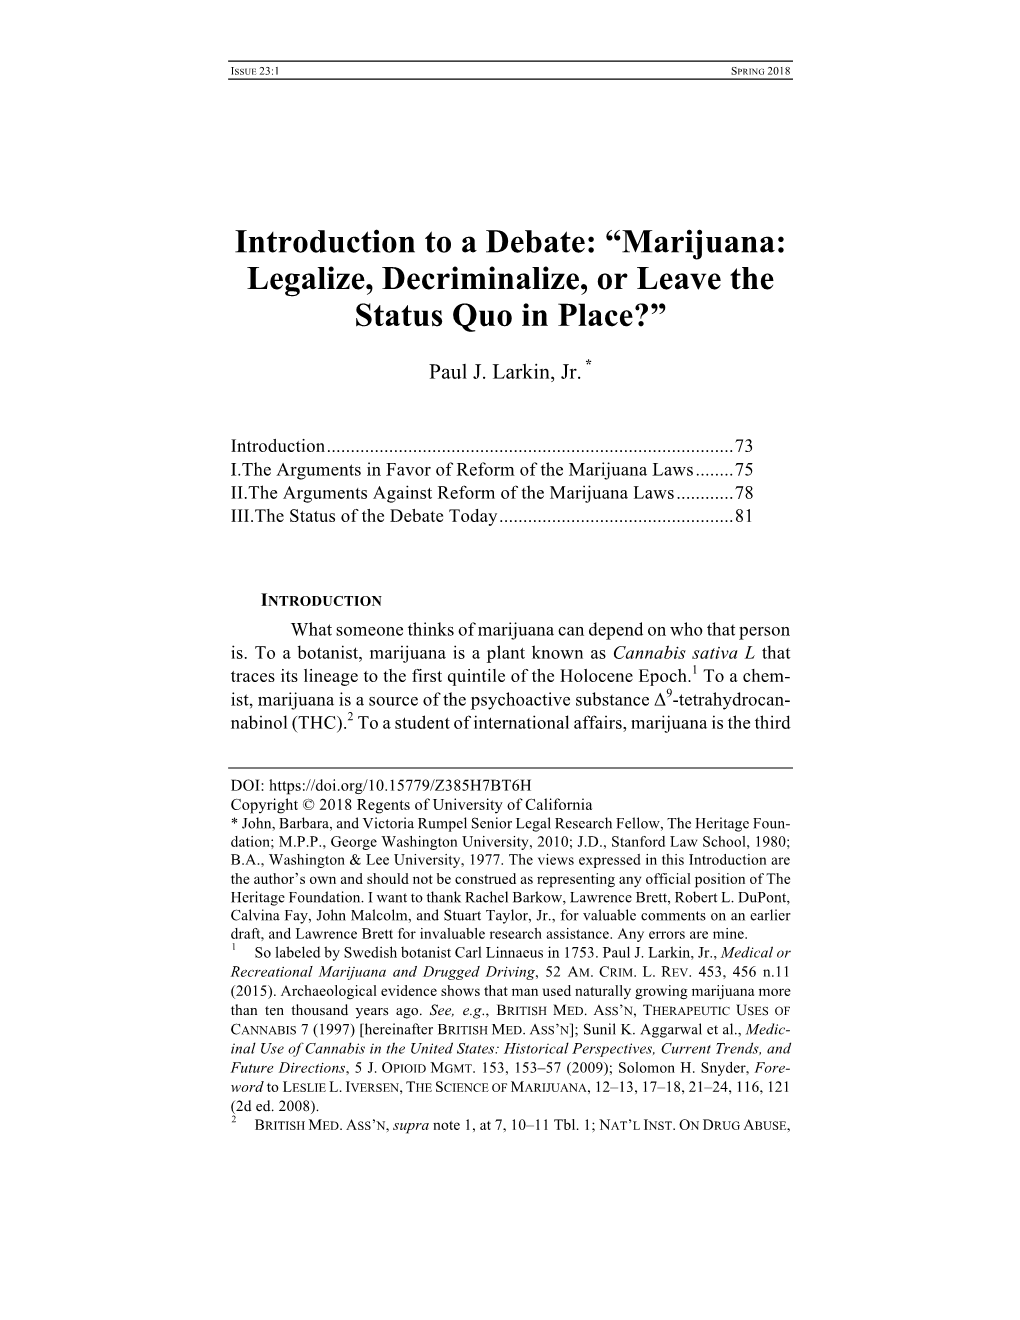 Introduction to a Debate: “Marijuana: Legalize, Decriminalize, Or Leave the Status Quo in Place?”